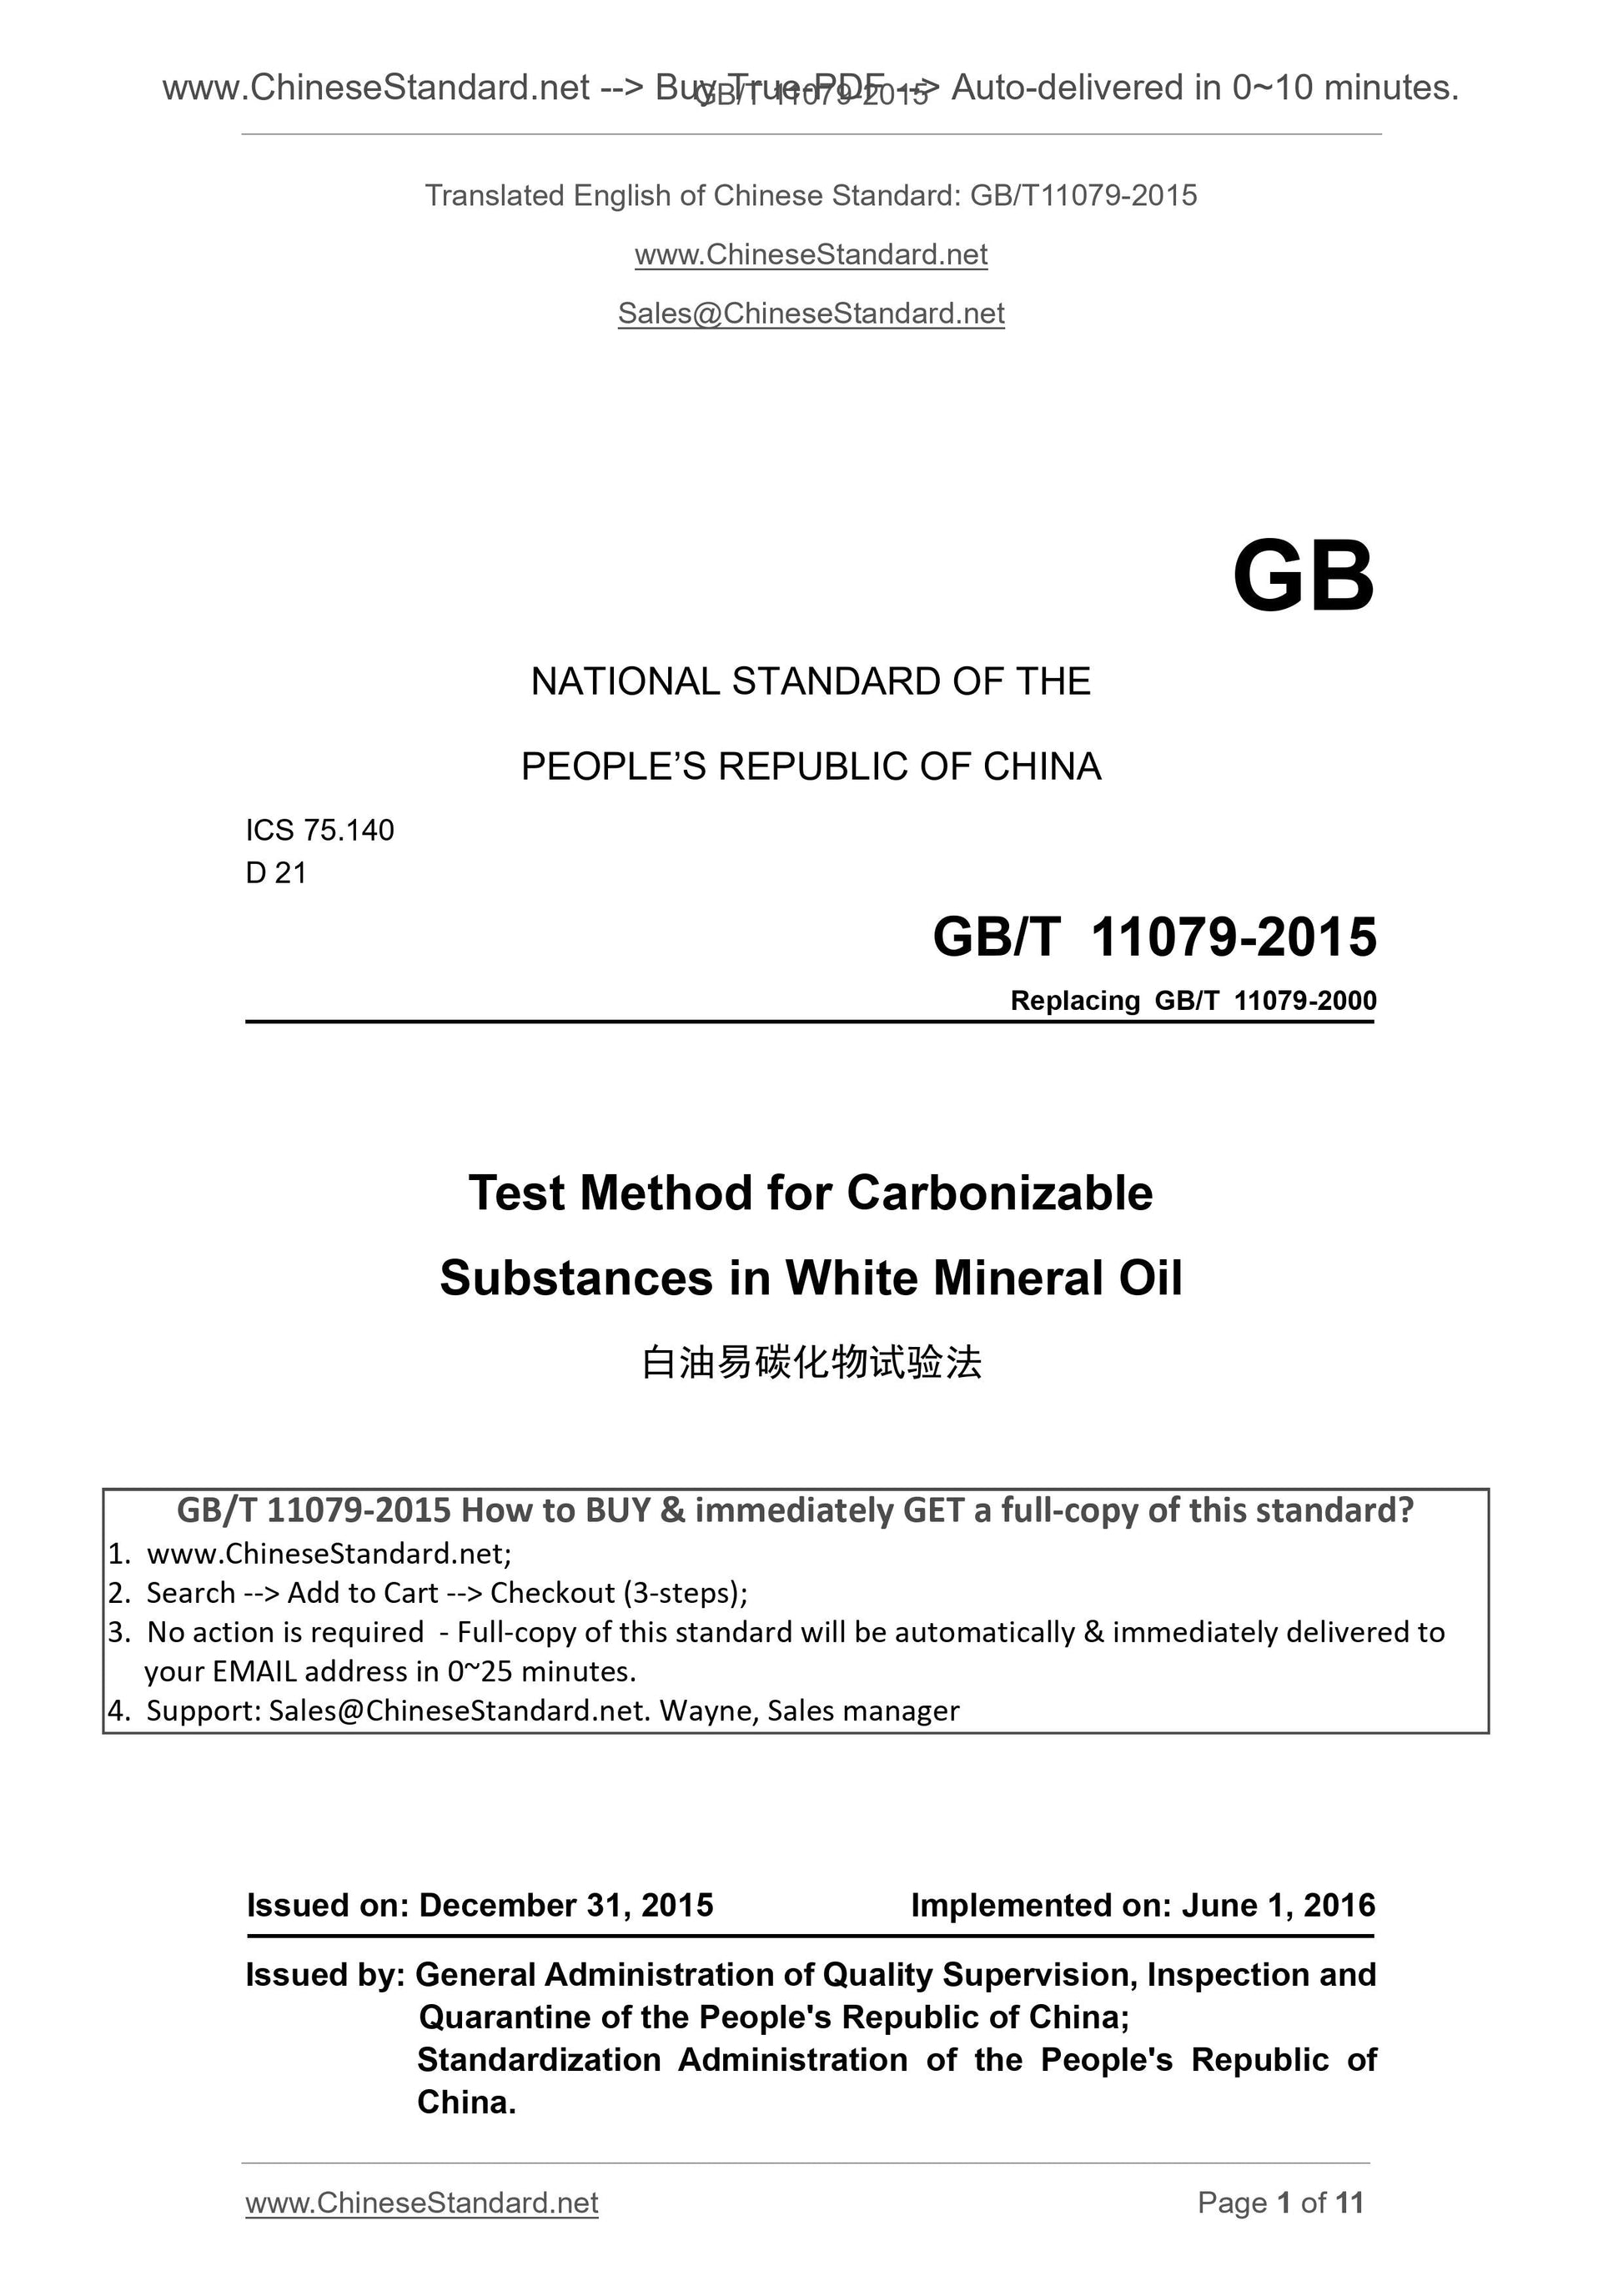 GB/T 11079-2015 Page 1